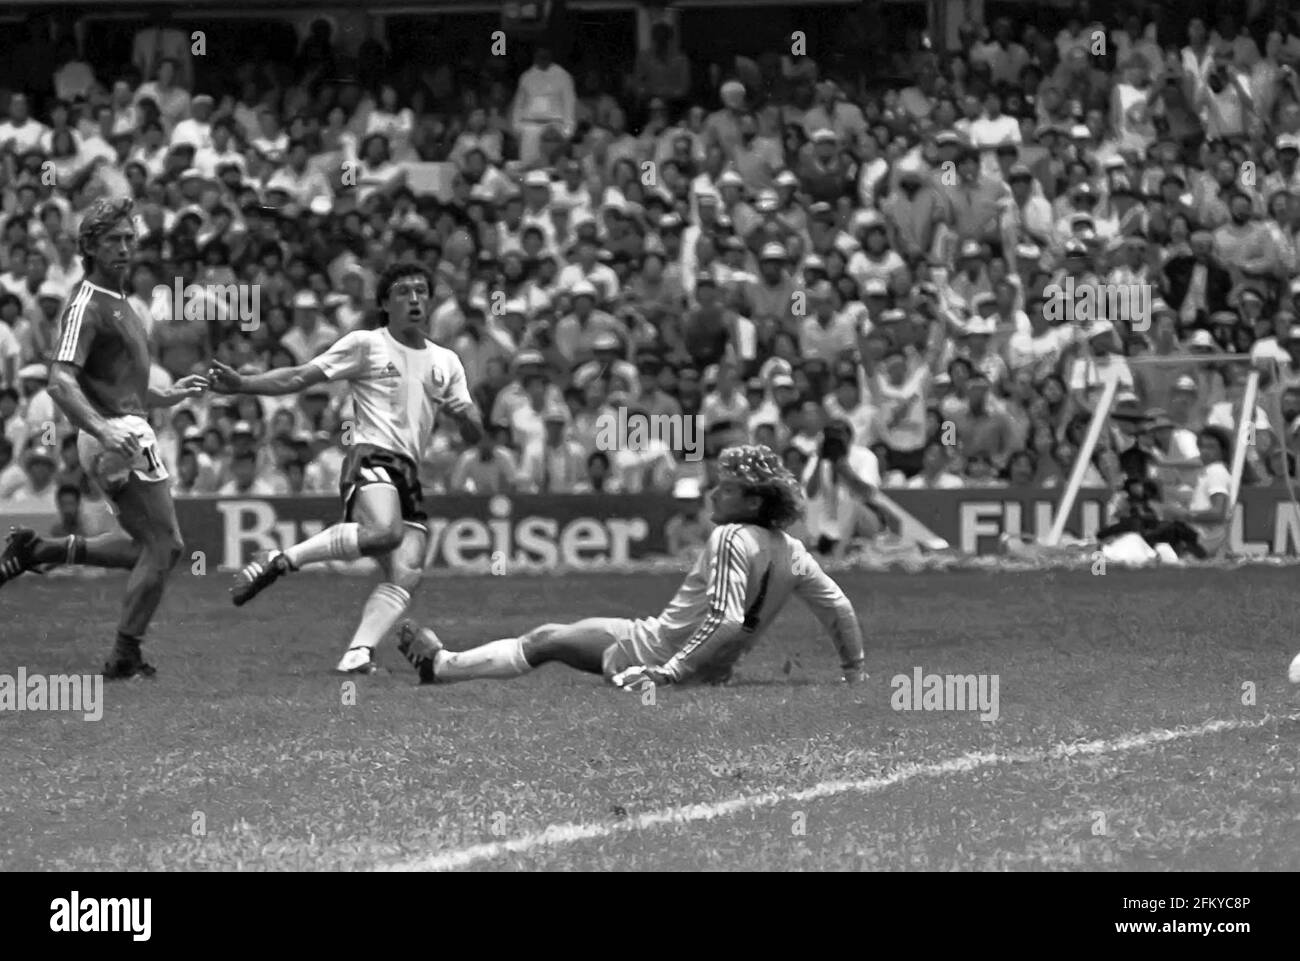 Jorge Valdano (Argentina) scores the game winning goal in the Mexico 1986 World Cup Final against Germany Stock Photo